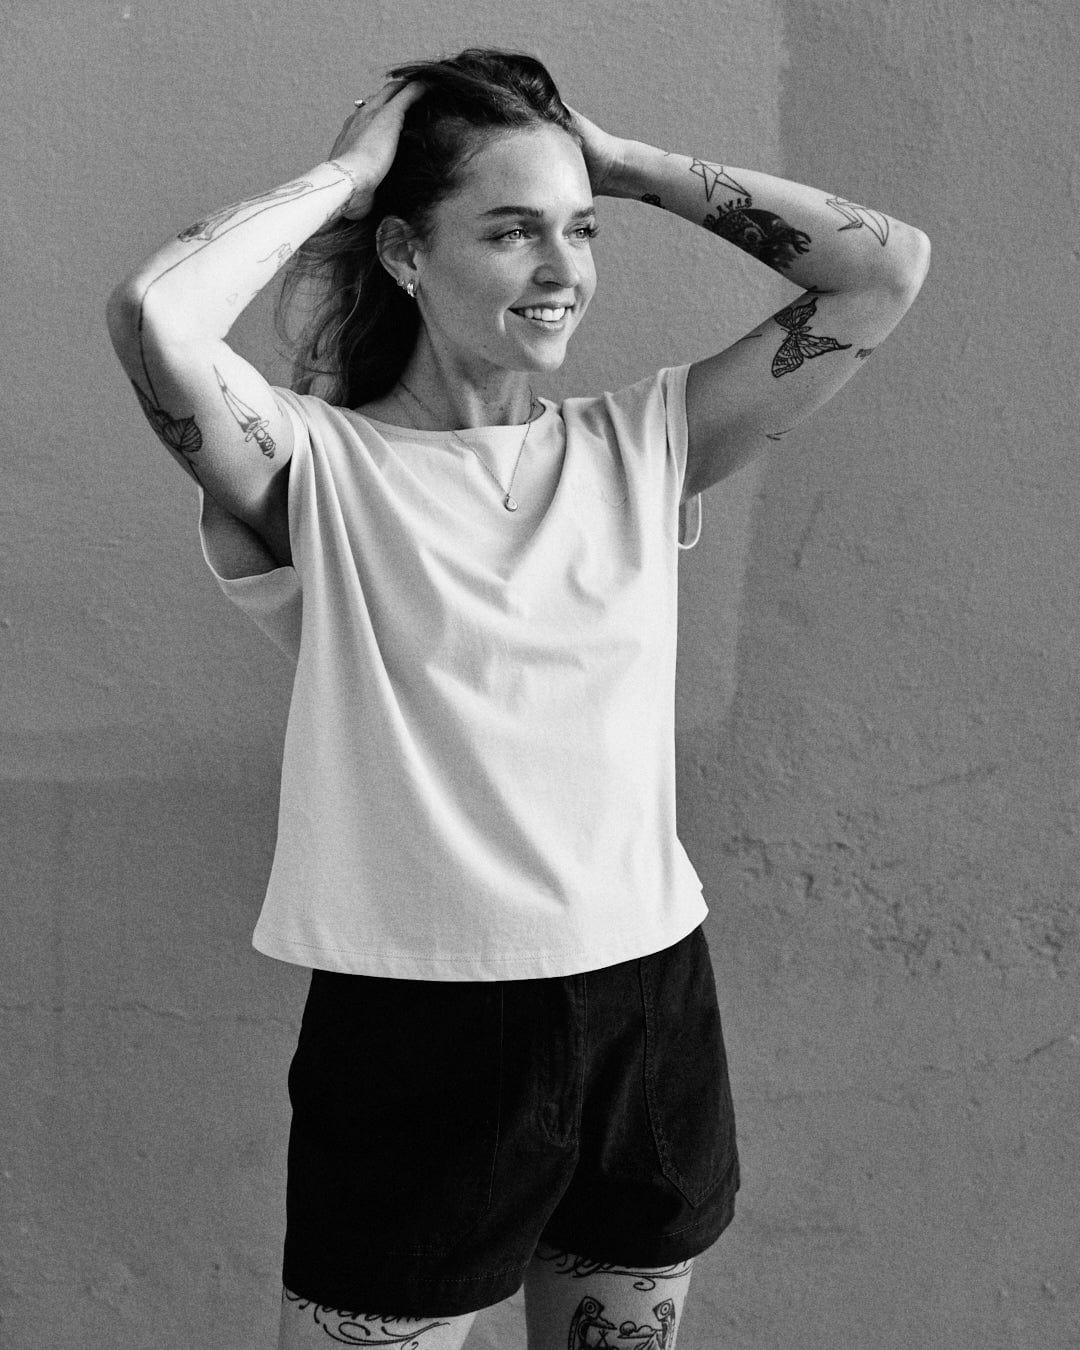 A person with tattoos, wearing a Saltrock Rhoda - Womens T-Shirt - Light Blue and dark shorts, stands against a wall. They are smiling and have their hands on their head. The shirt, made from 100% cotton, features a dropped back detail that adds a unique touch to the casual outfit.